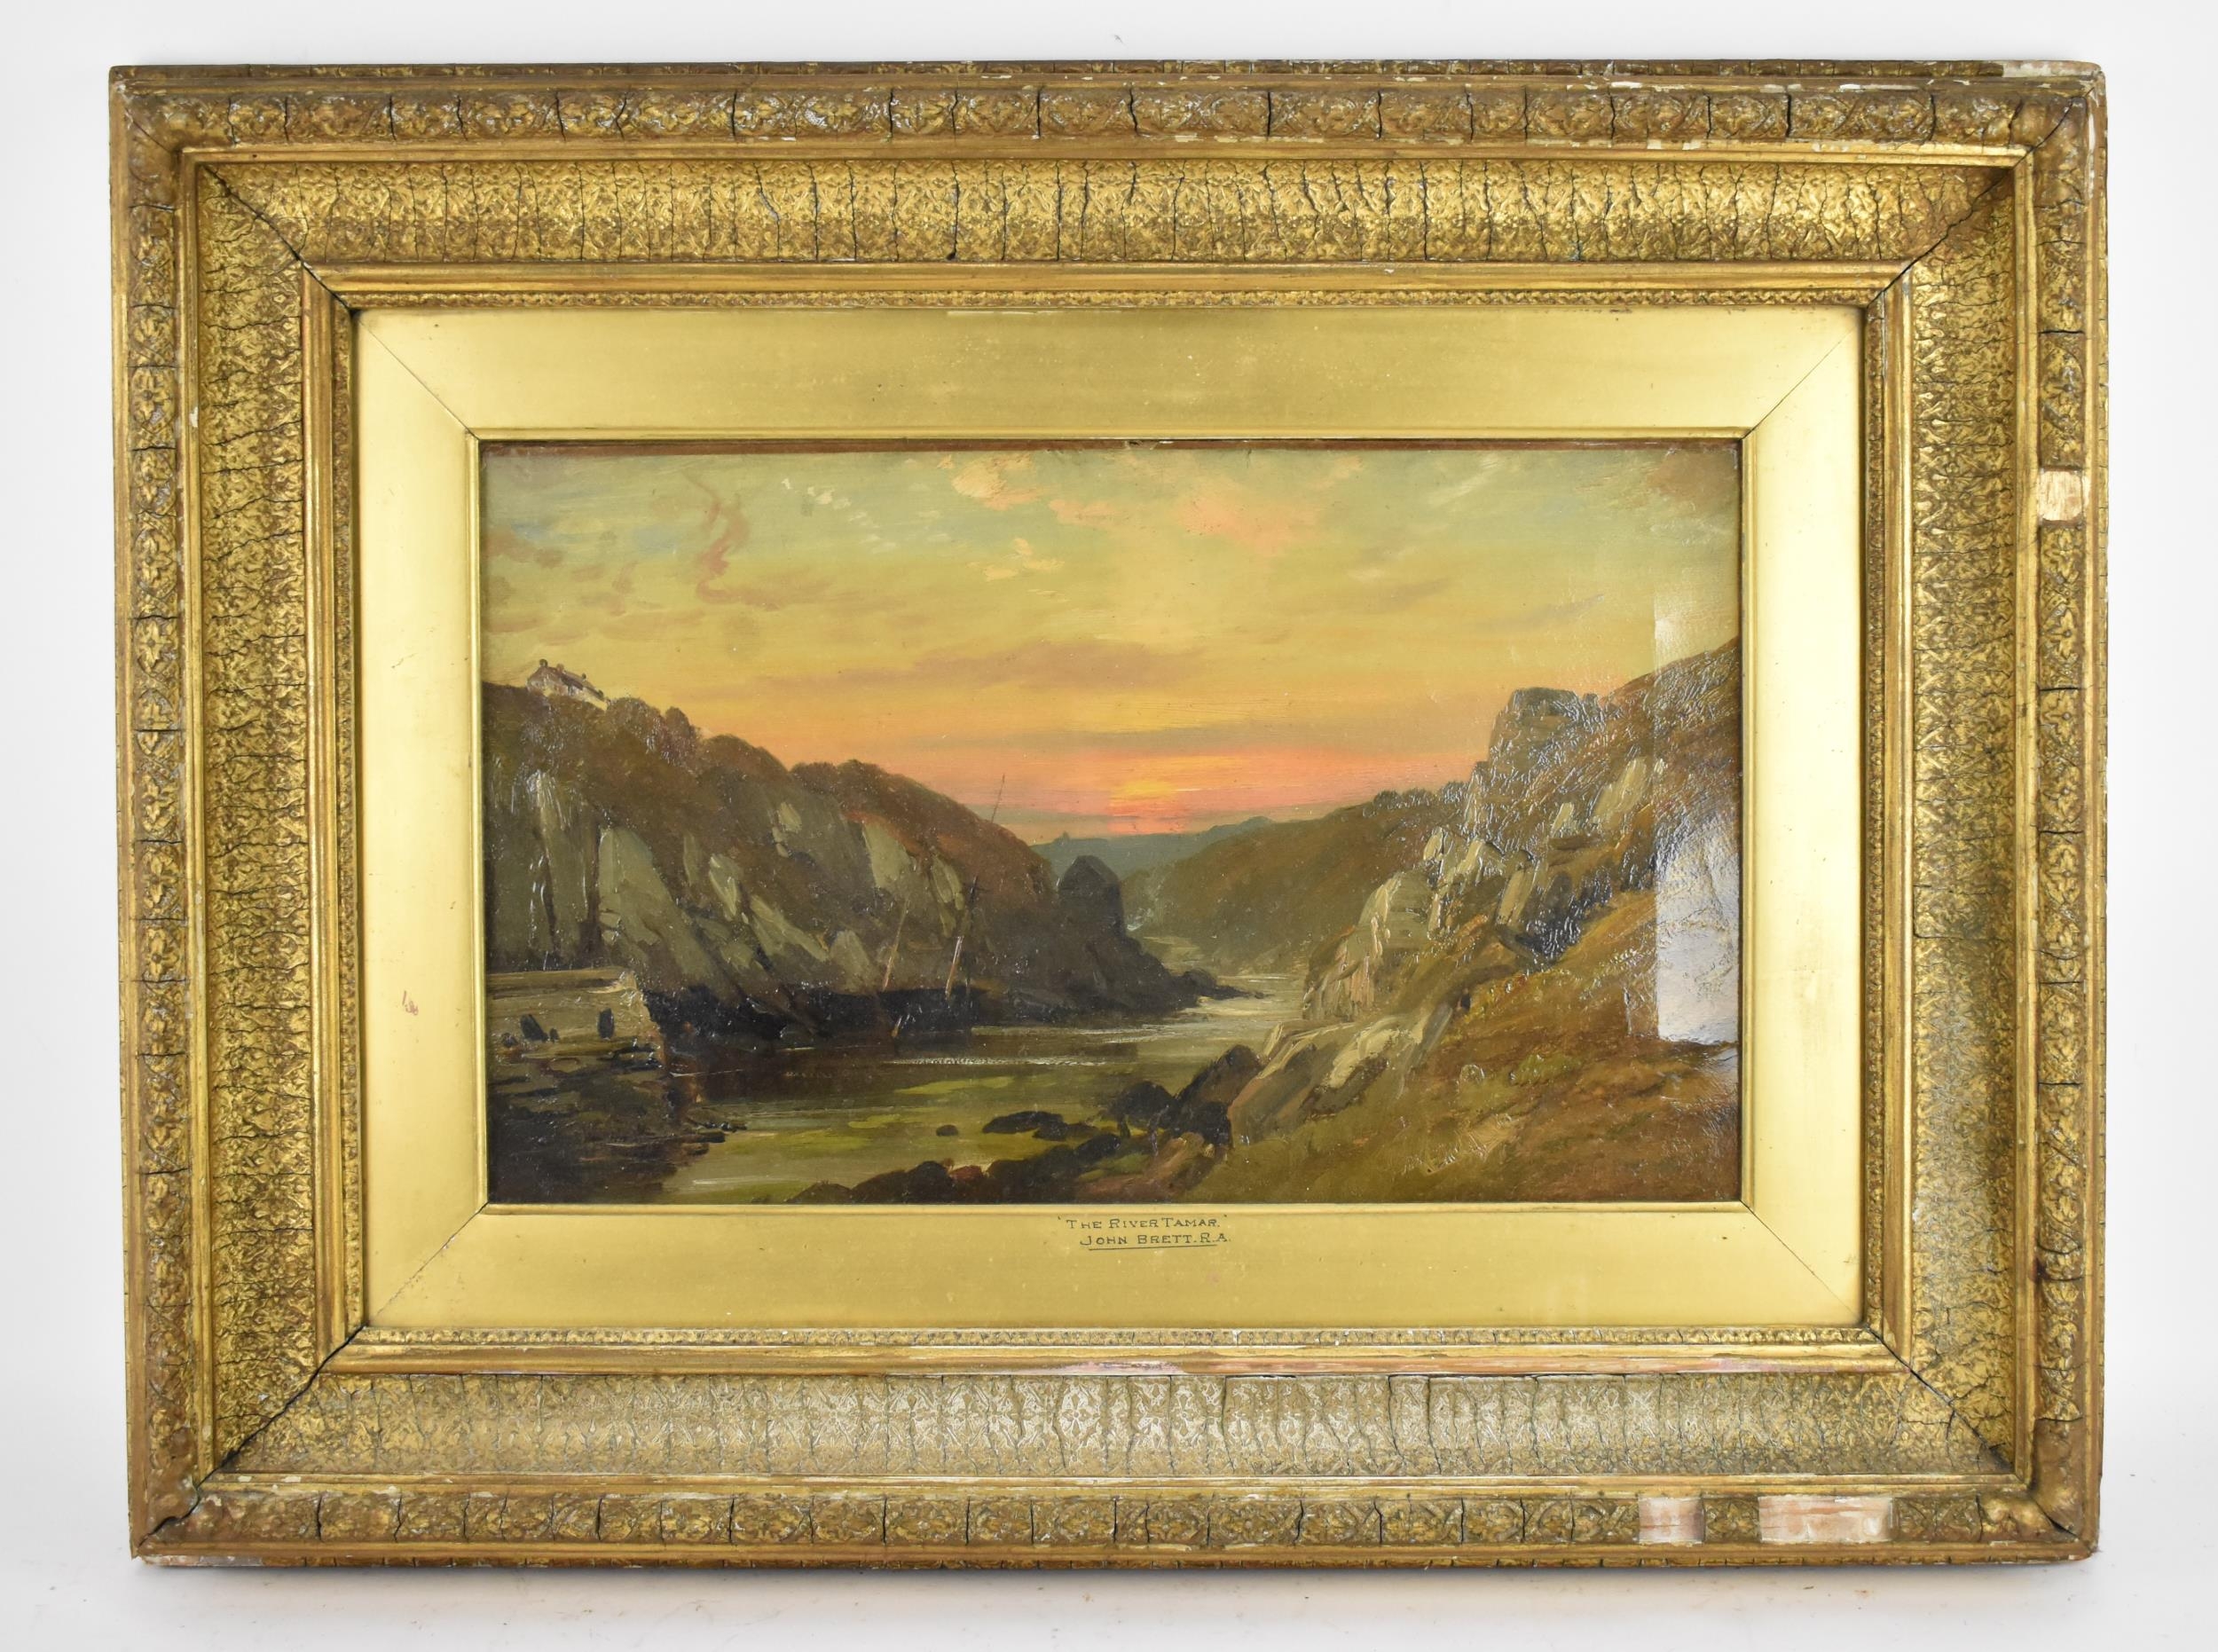 British 'The River Tamar', depicting a river landscape with sunset in the background, signed John